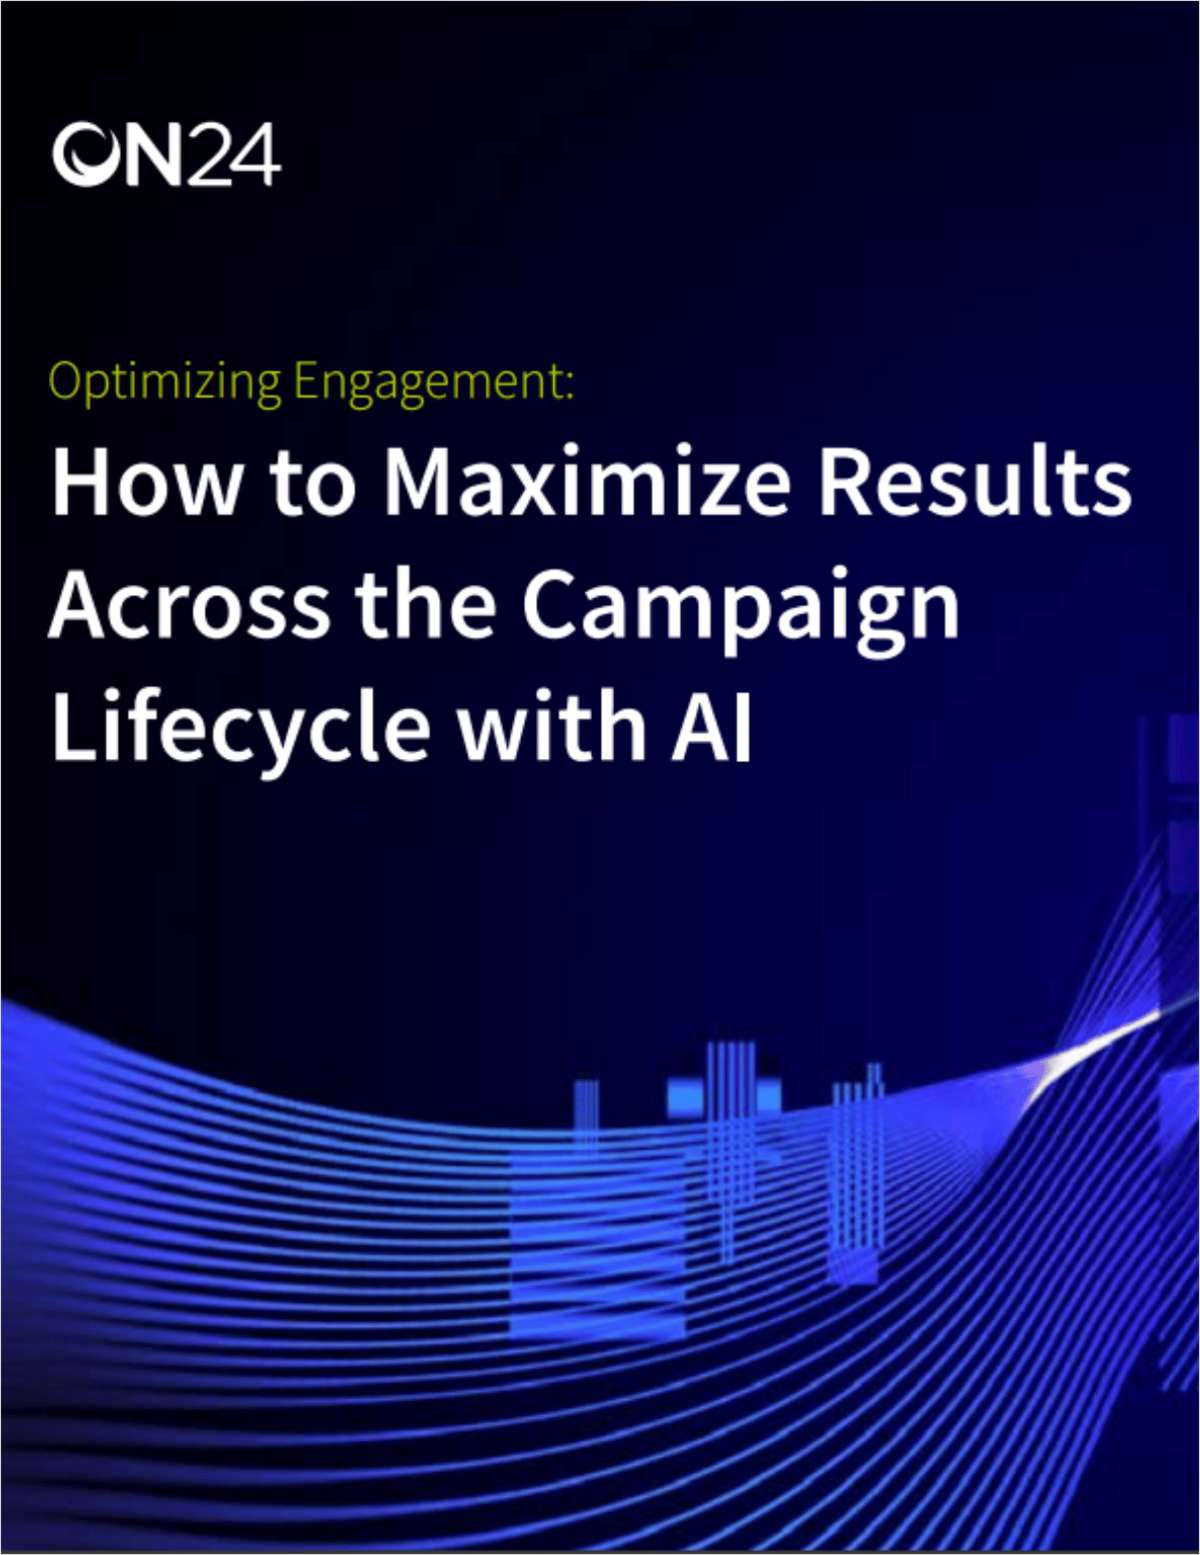 How to Maximize Results Across the Campaign Lifecycle with AI